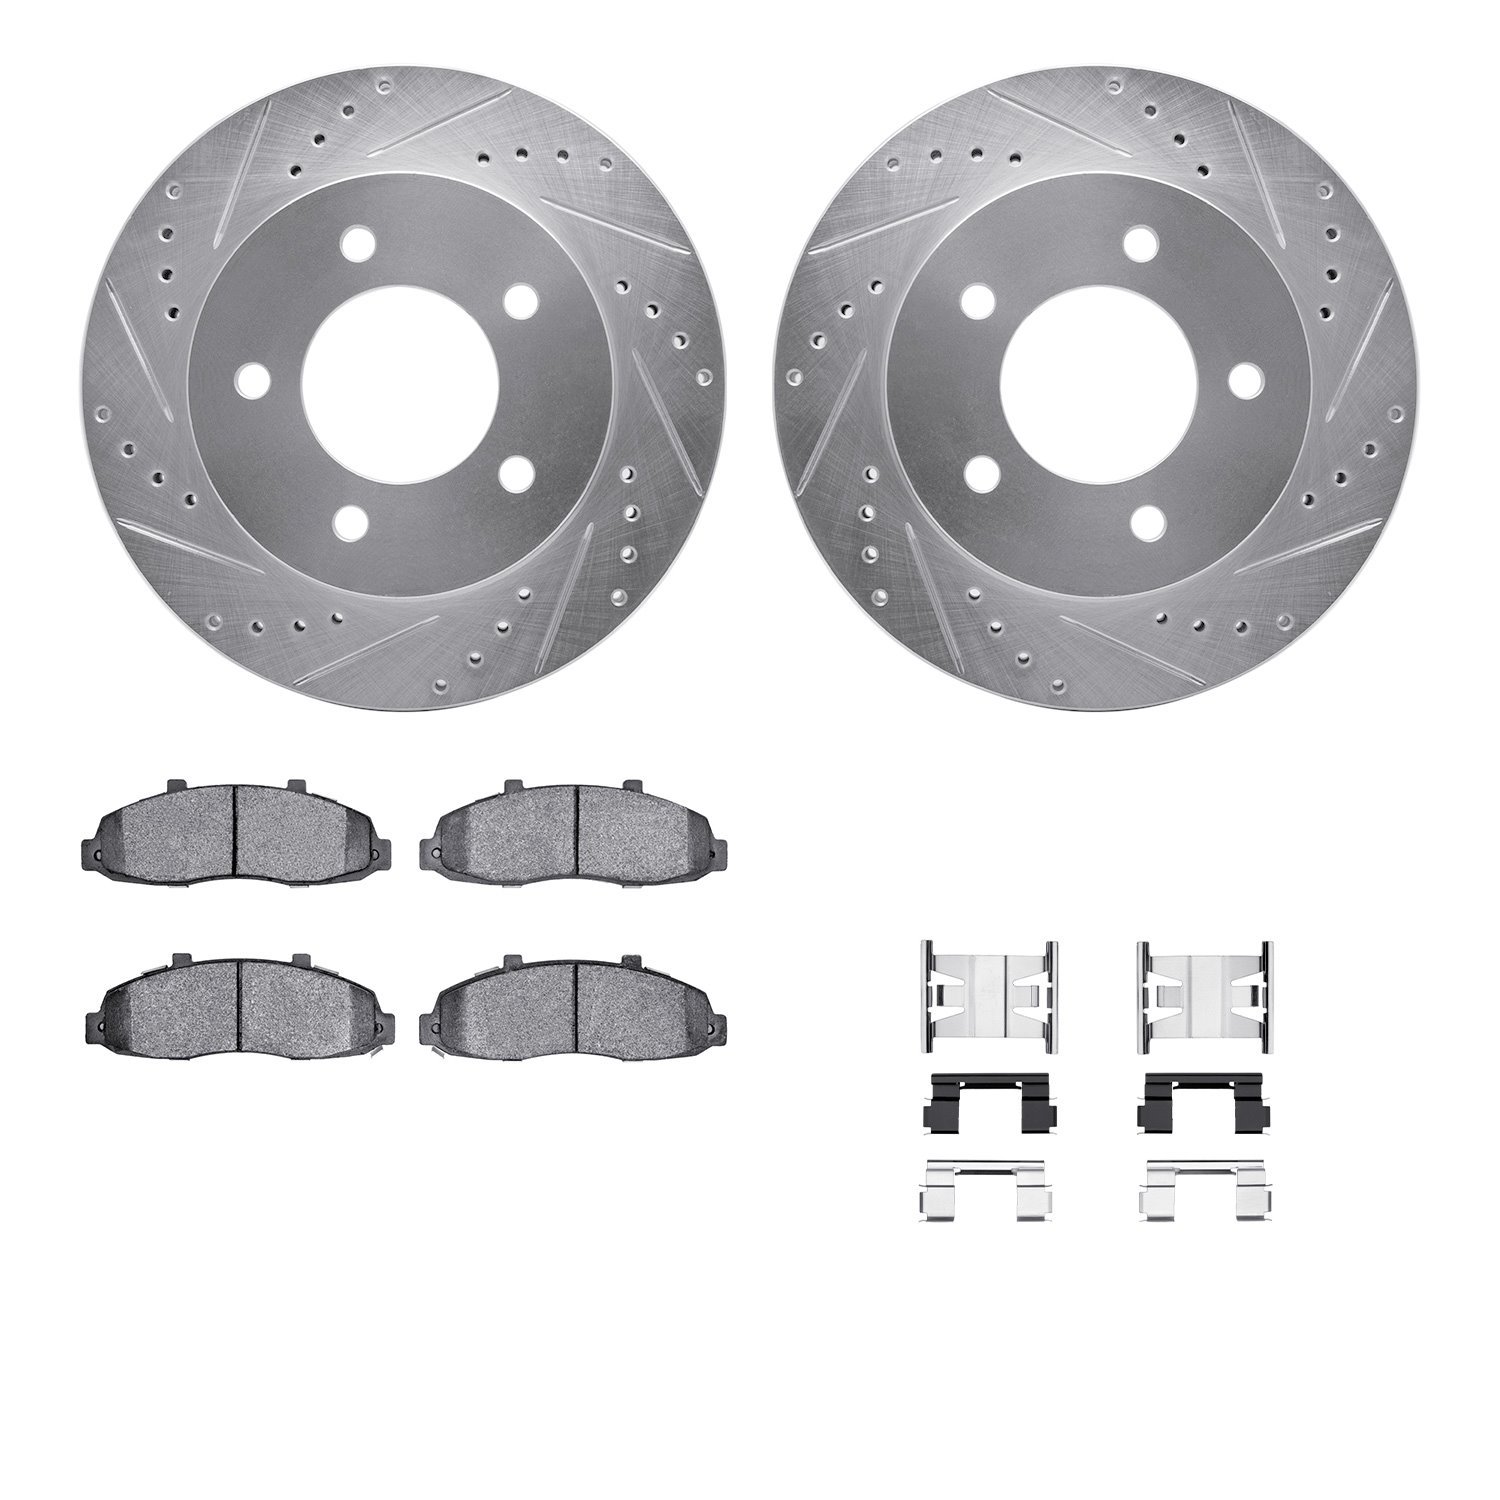 7412-54035 Drilled/Slotted Brake Rotors with Ultimate-Duty Brake Pads Kit & Hardware [Silver], 1997-2004 Ford/Lincoln/Mercury/Ma